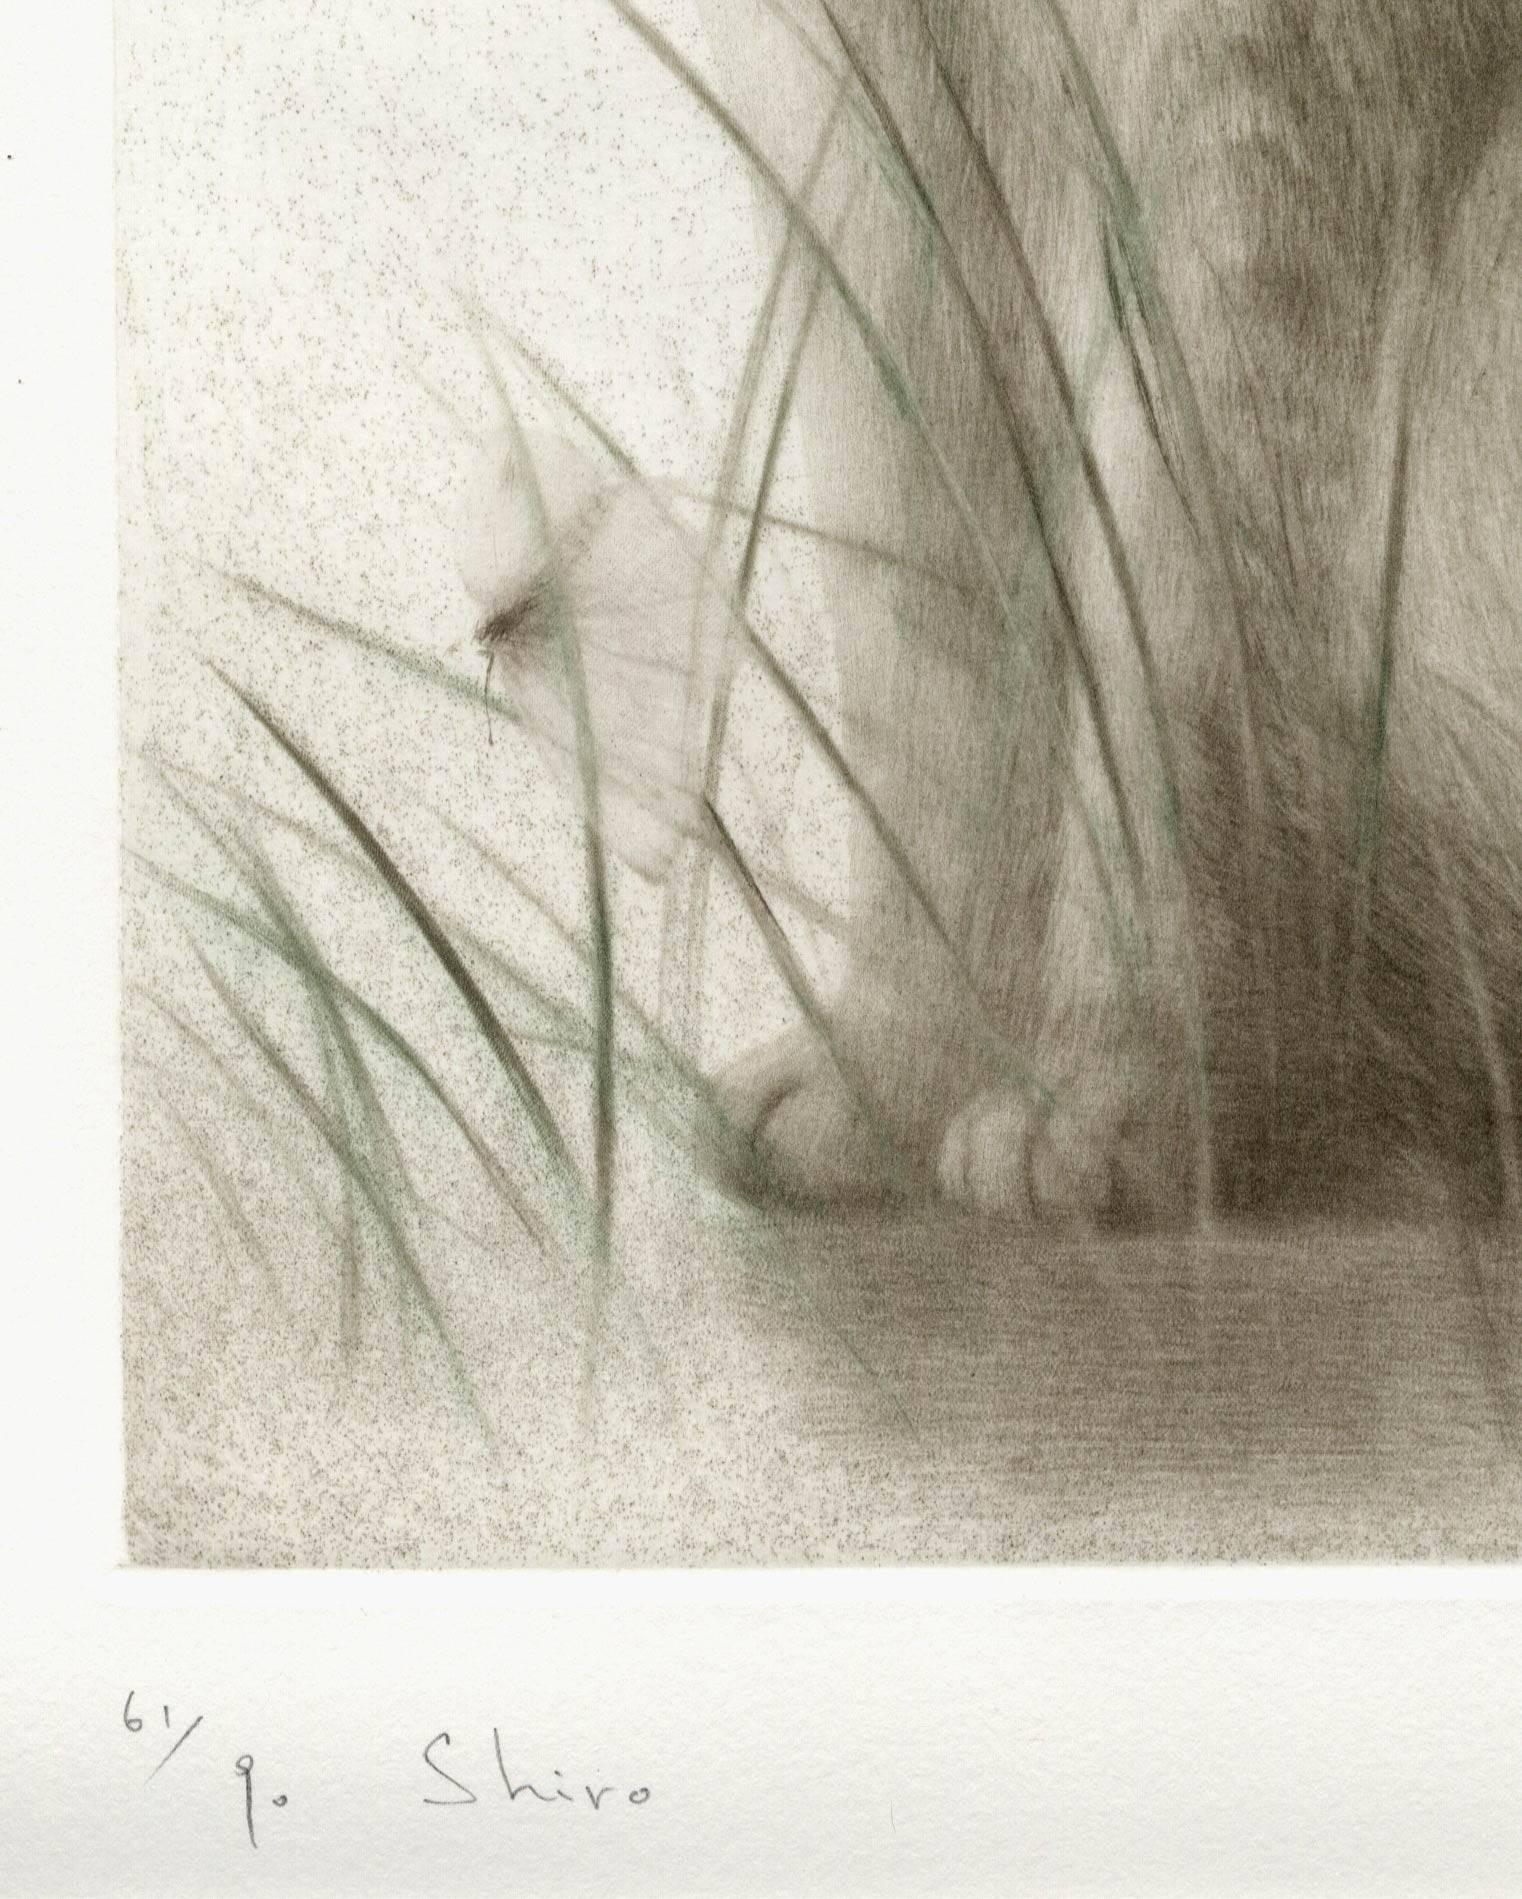 Shiro (portrait of an elegant, alert cat sitting in a meadow with flying insect) - Contemporary Print by Mikio Watanabe